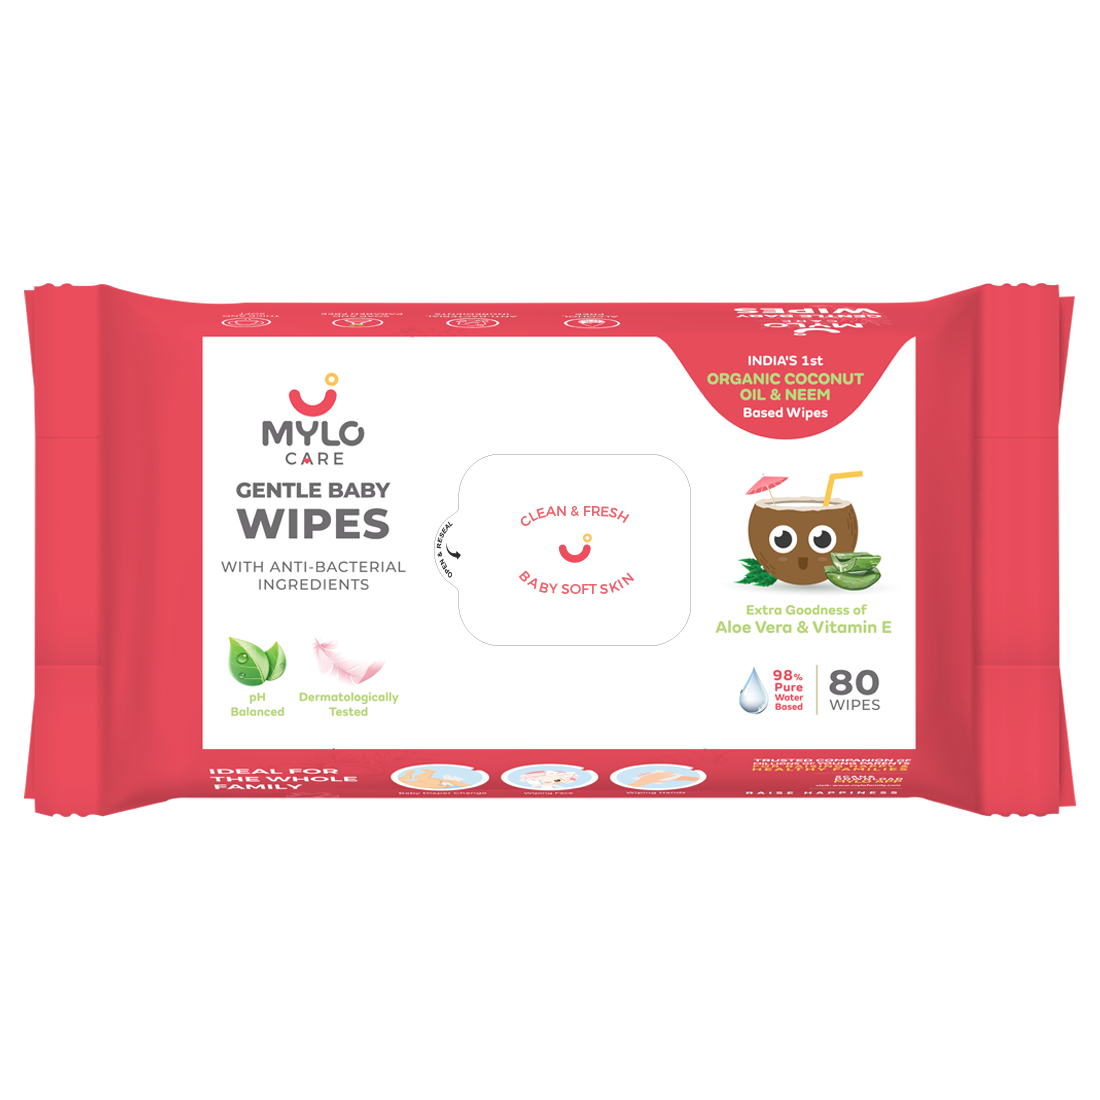 Gentle Baby Wipes with Organic Coconut Oil & Neem Without Lid (80 wipes)